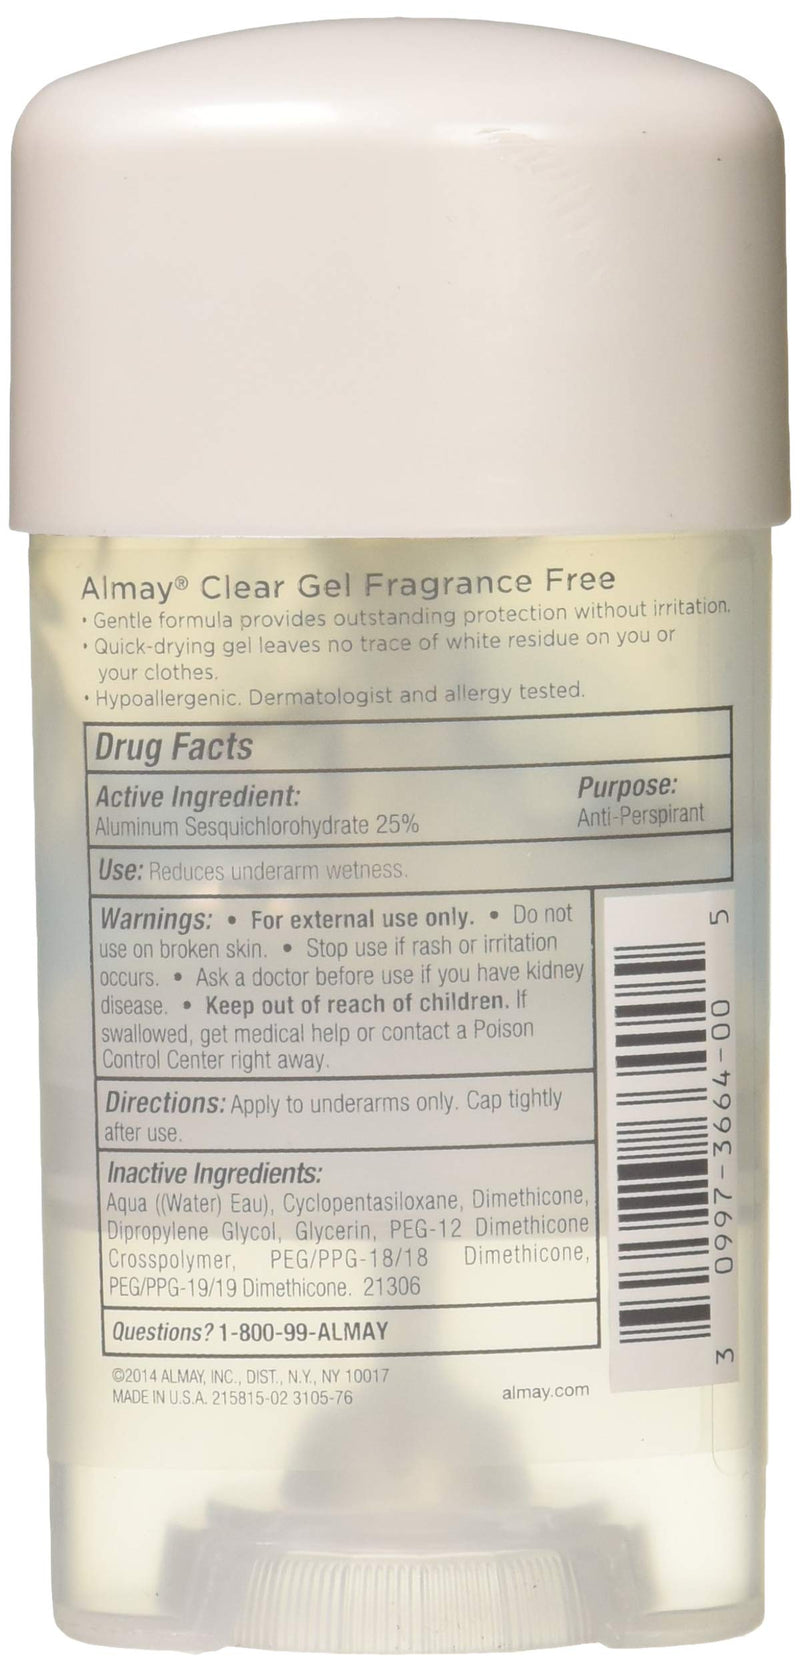 [Australia] - Almay Clear Gel, Anti-Perspirant and Deodorant, Fragrance Free, 2.25-Ounce Stick (Pack of 3) 2.25 Ounce (Pack of 3) 